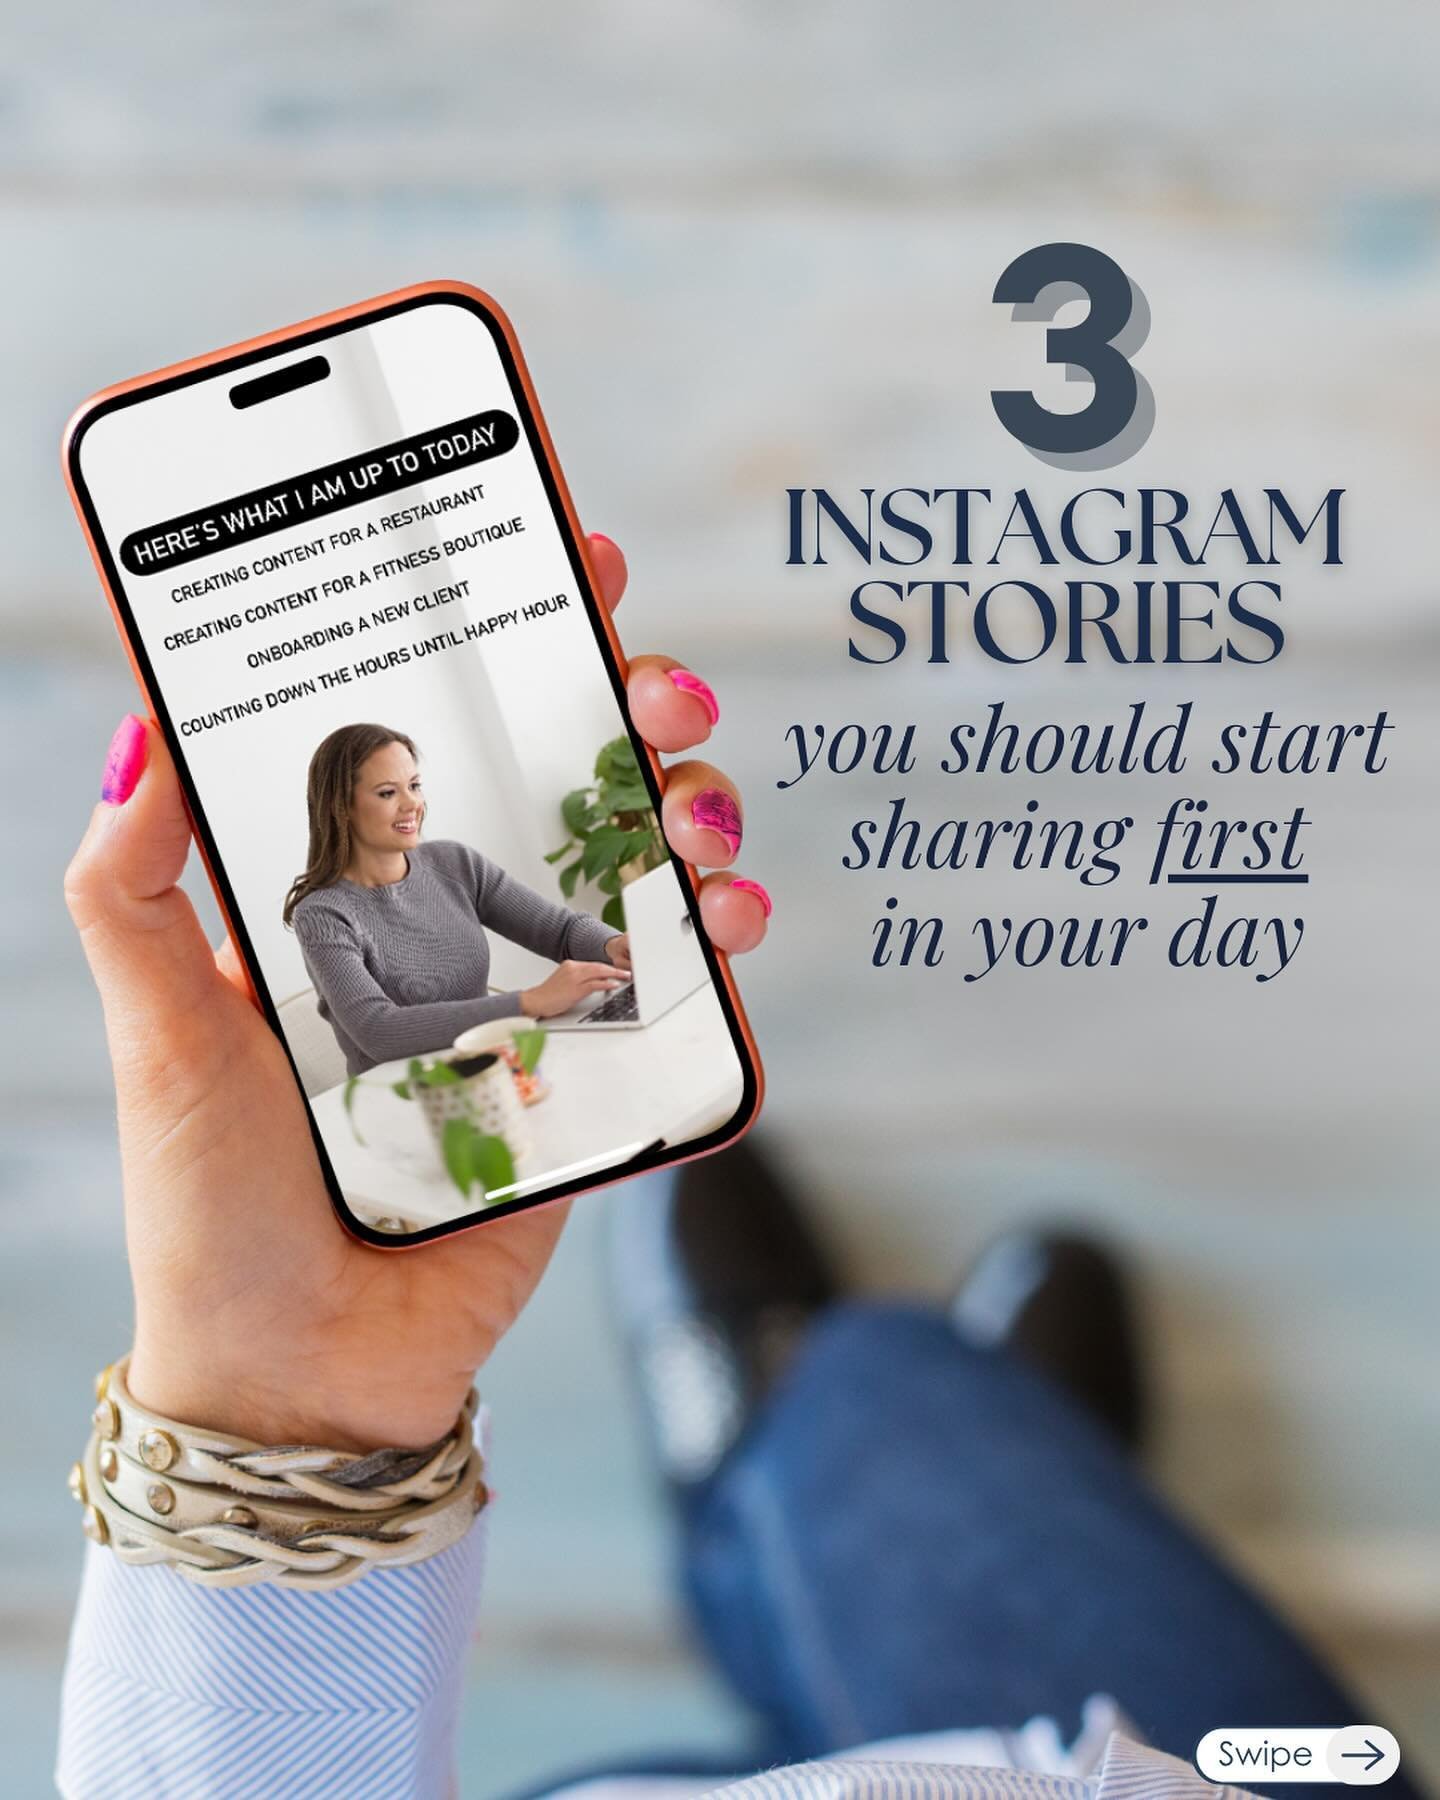 This is the IG story strategy you&rsquo;ve been looking for!
Make sure to SAVE this post because you&rsquo;ll definitely want to refer back to it when creating the best Stories on Instagram!📥

Have you noticed that after your first few stories are p